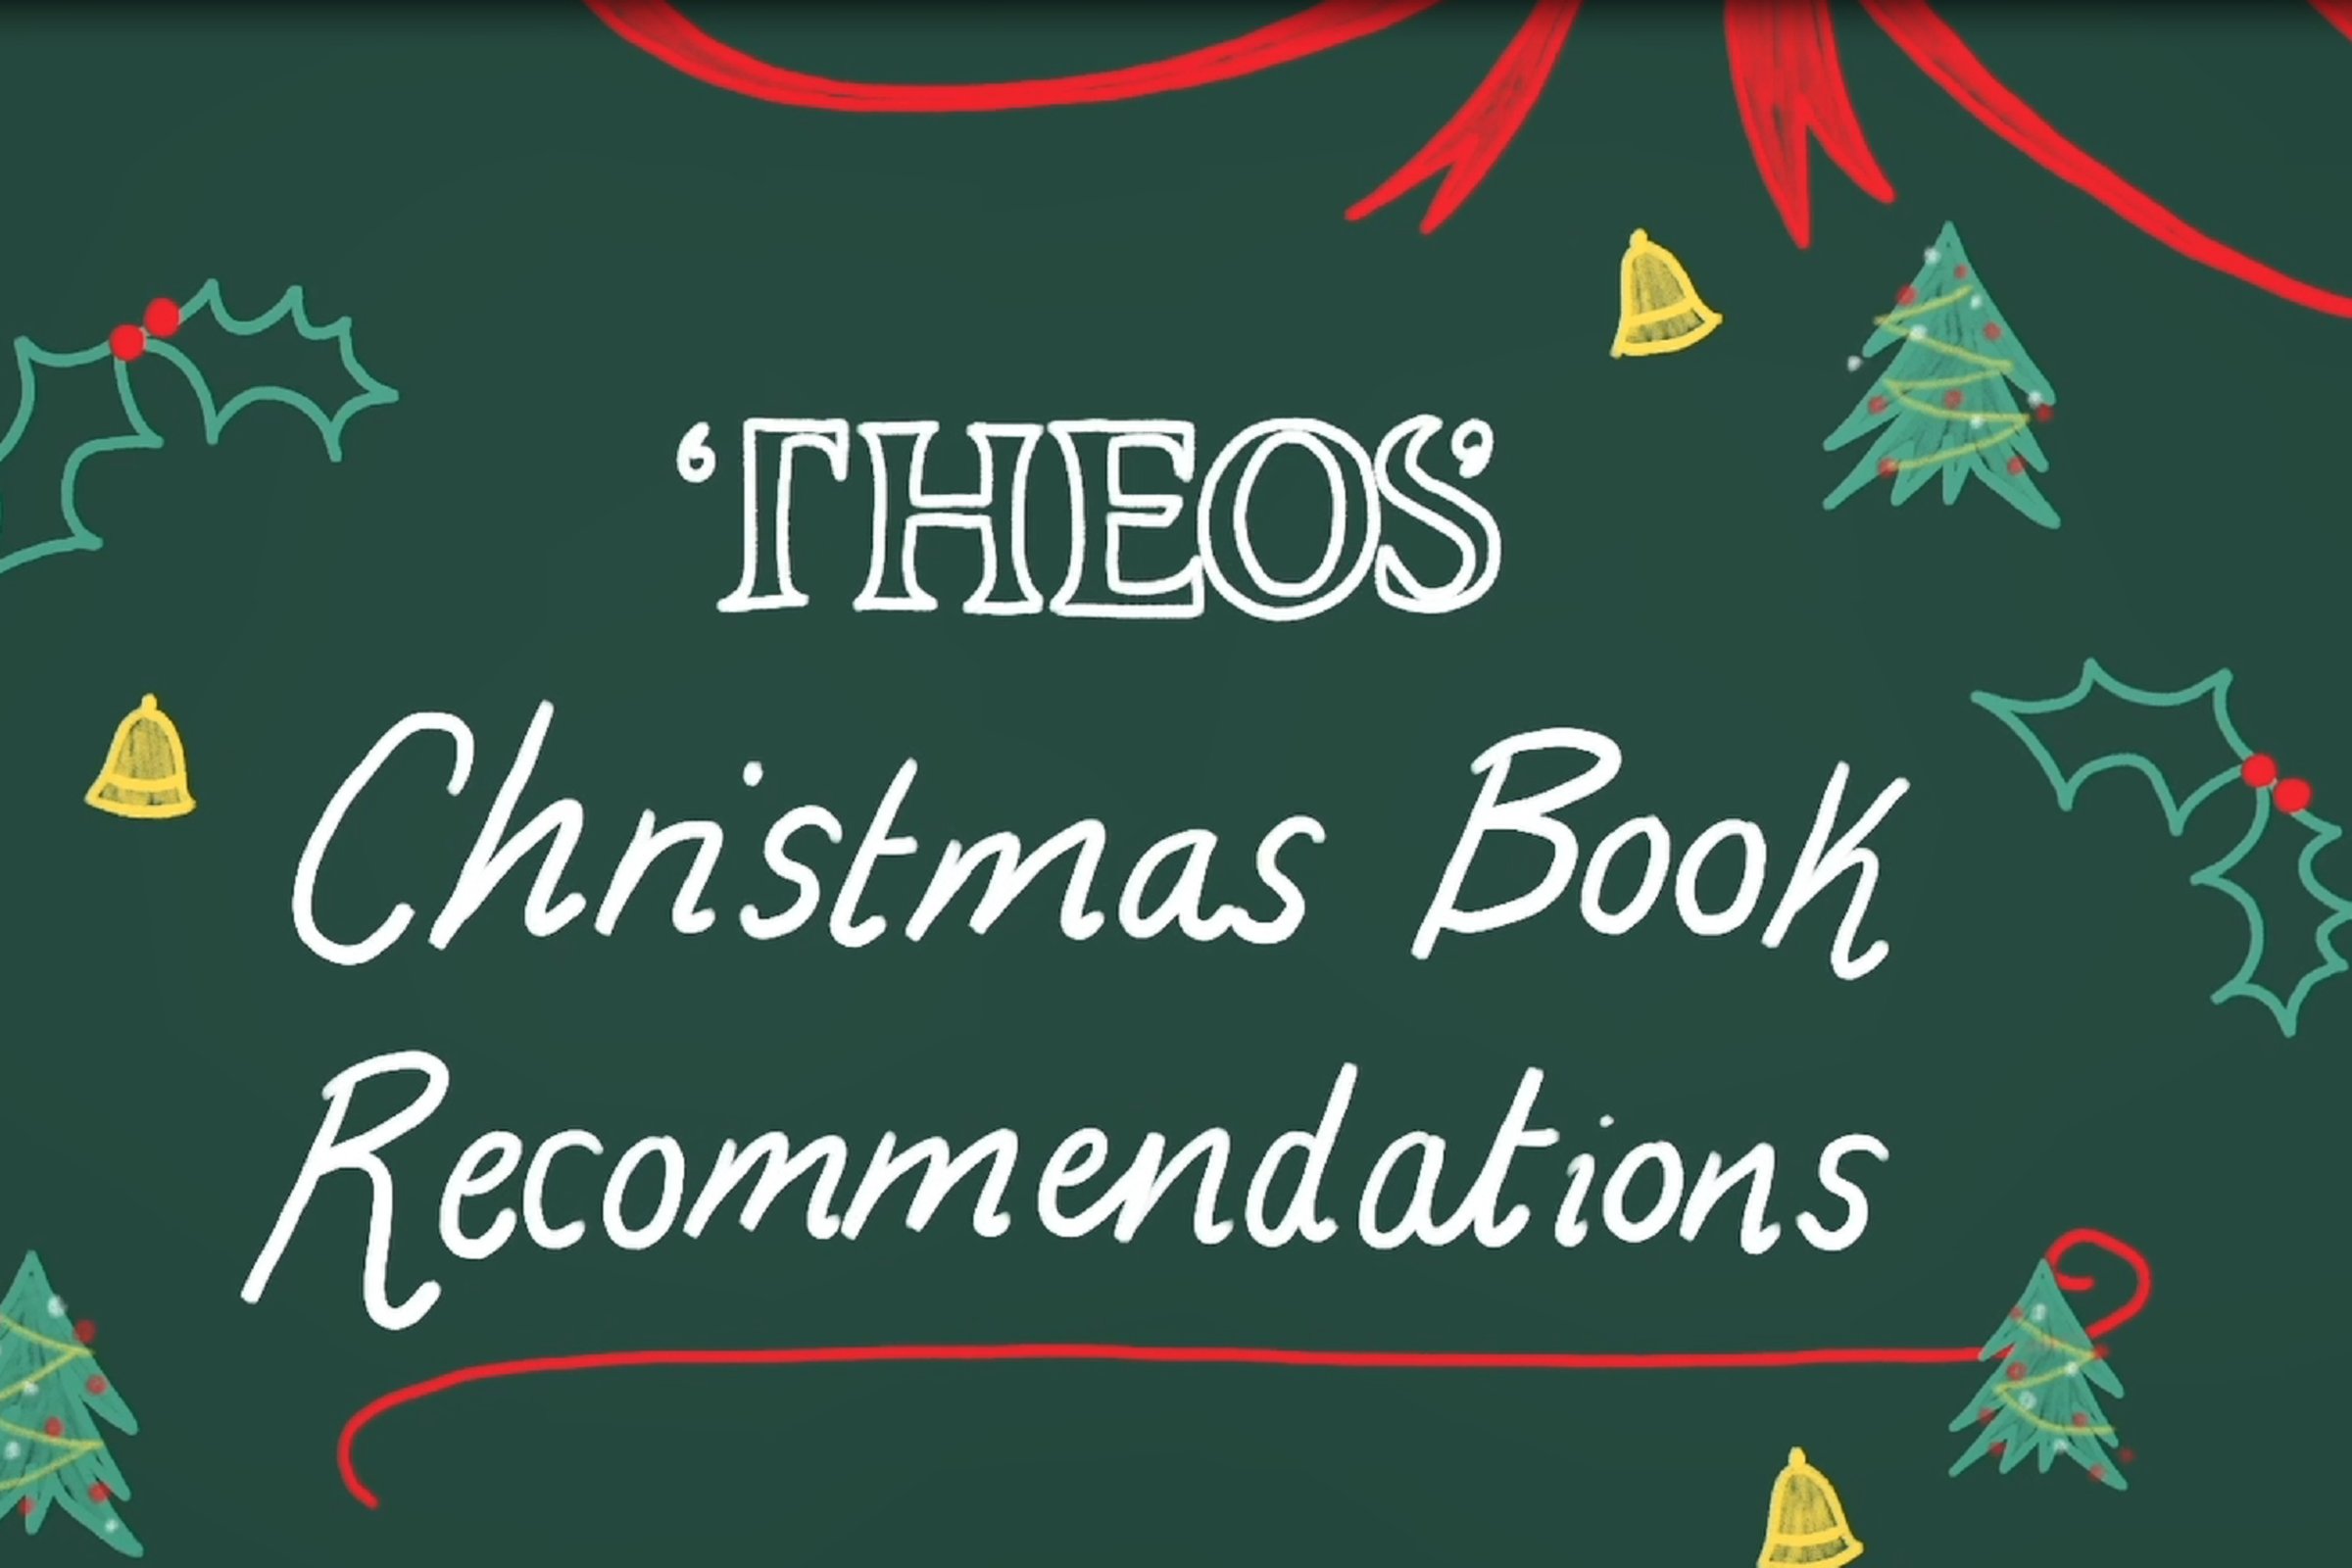 Book recommendations for Christmas 2020